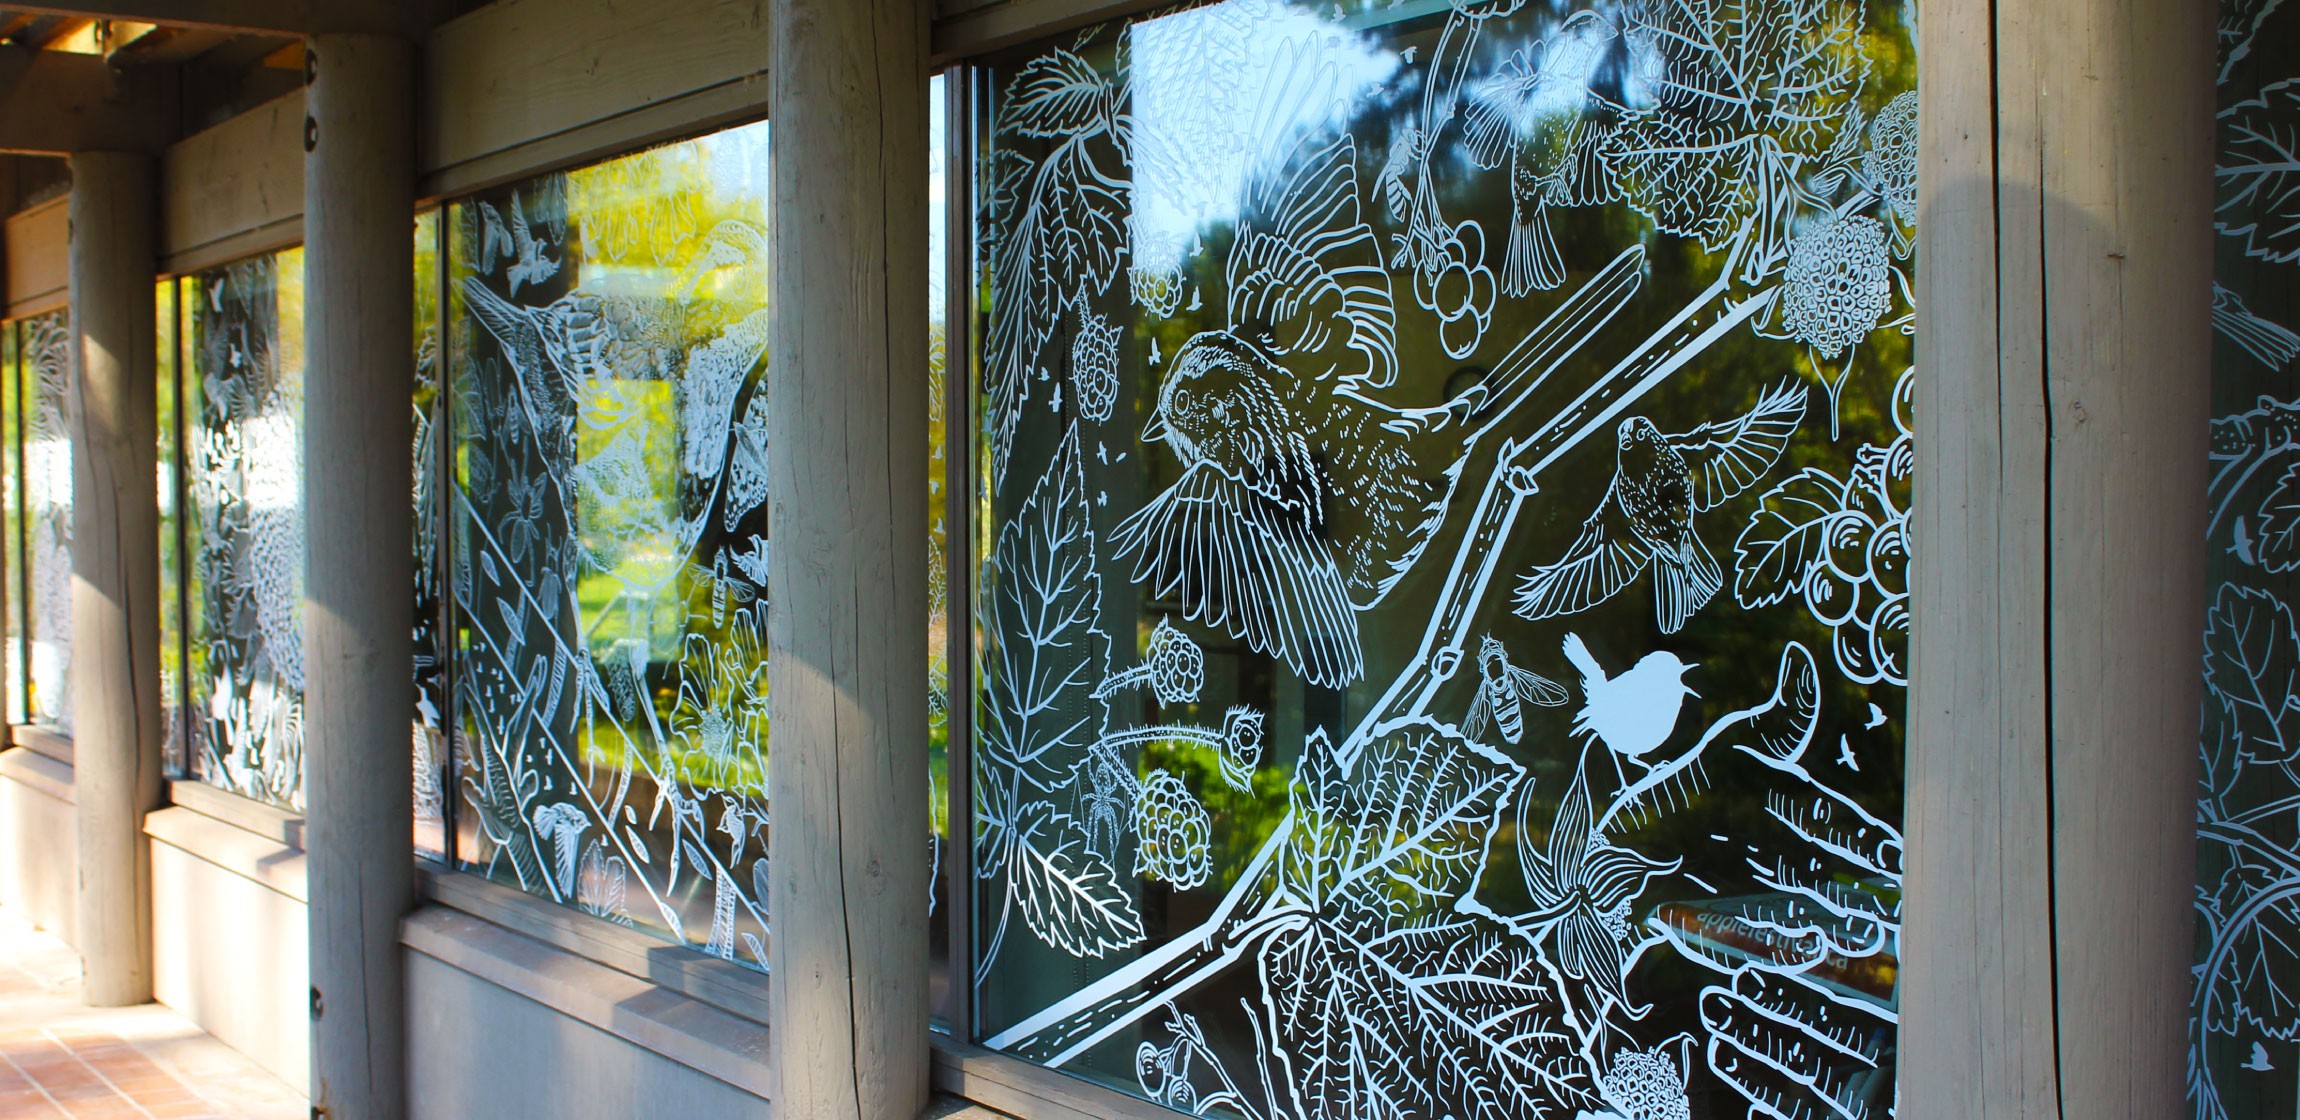 Windows at the UBC Botanical Gardens, which have been covered in artistic decals to prevent birds from flying into them